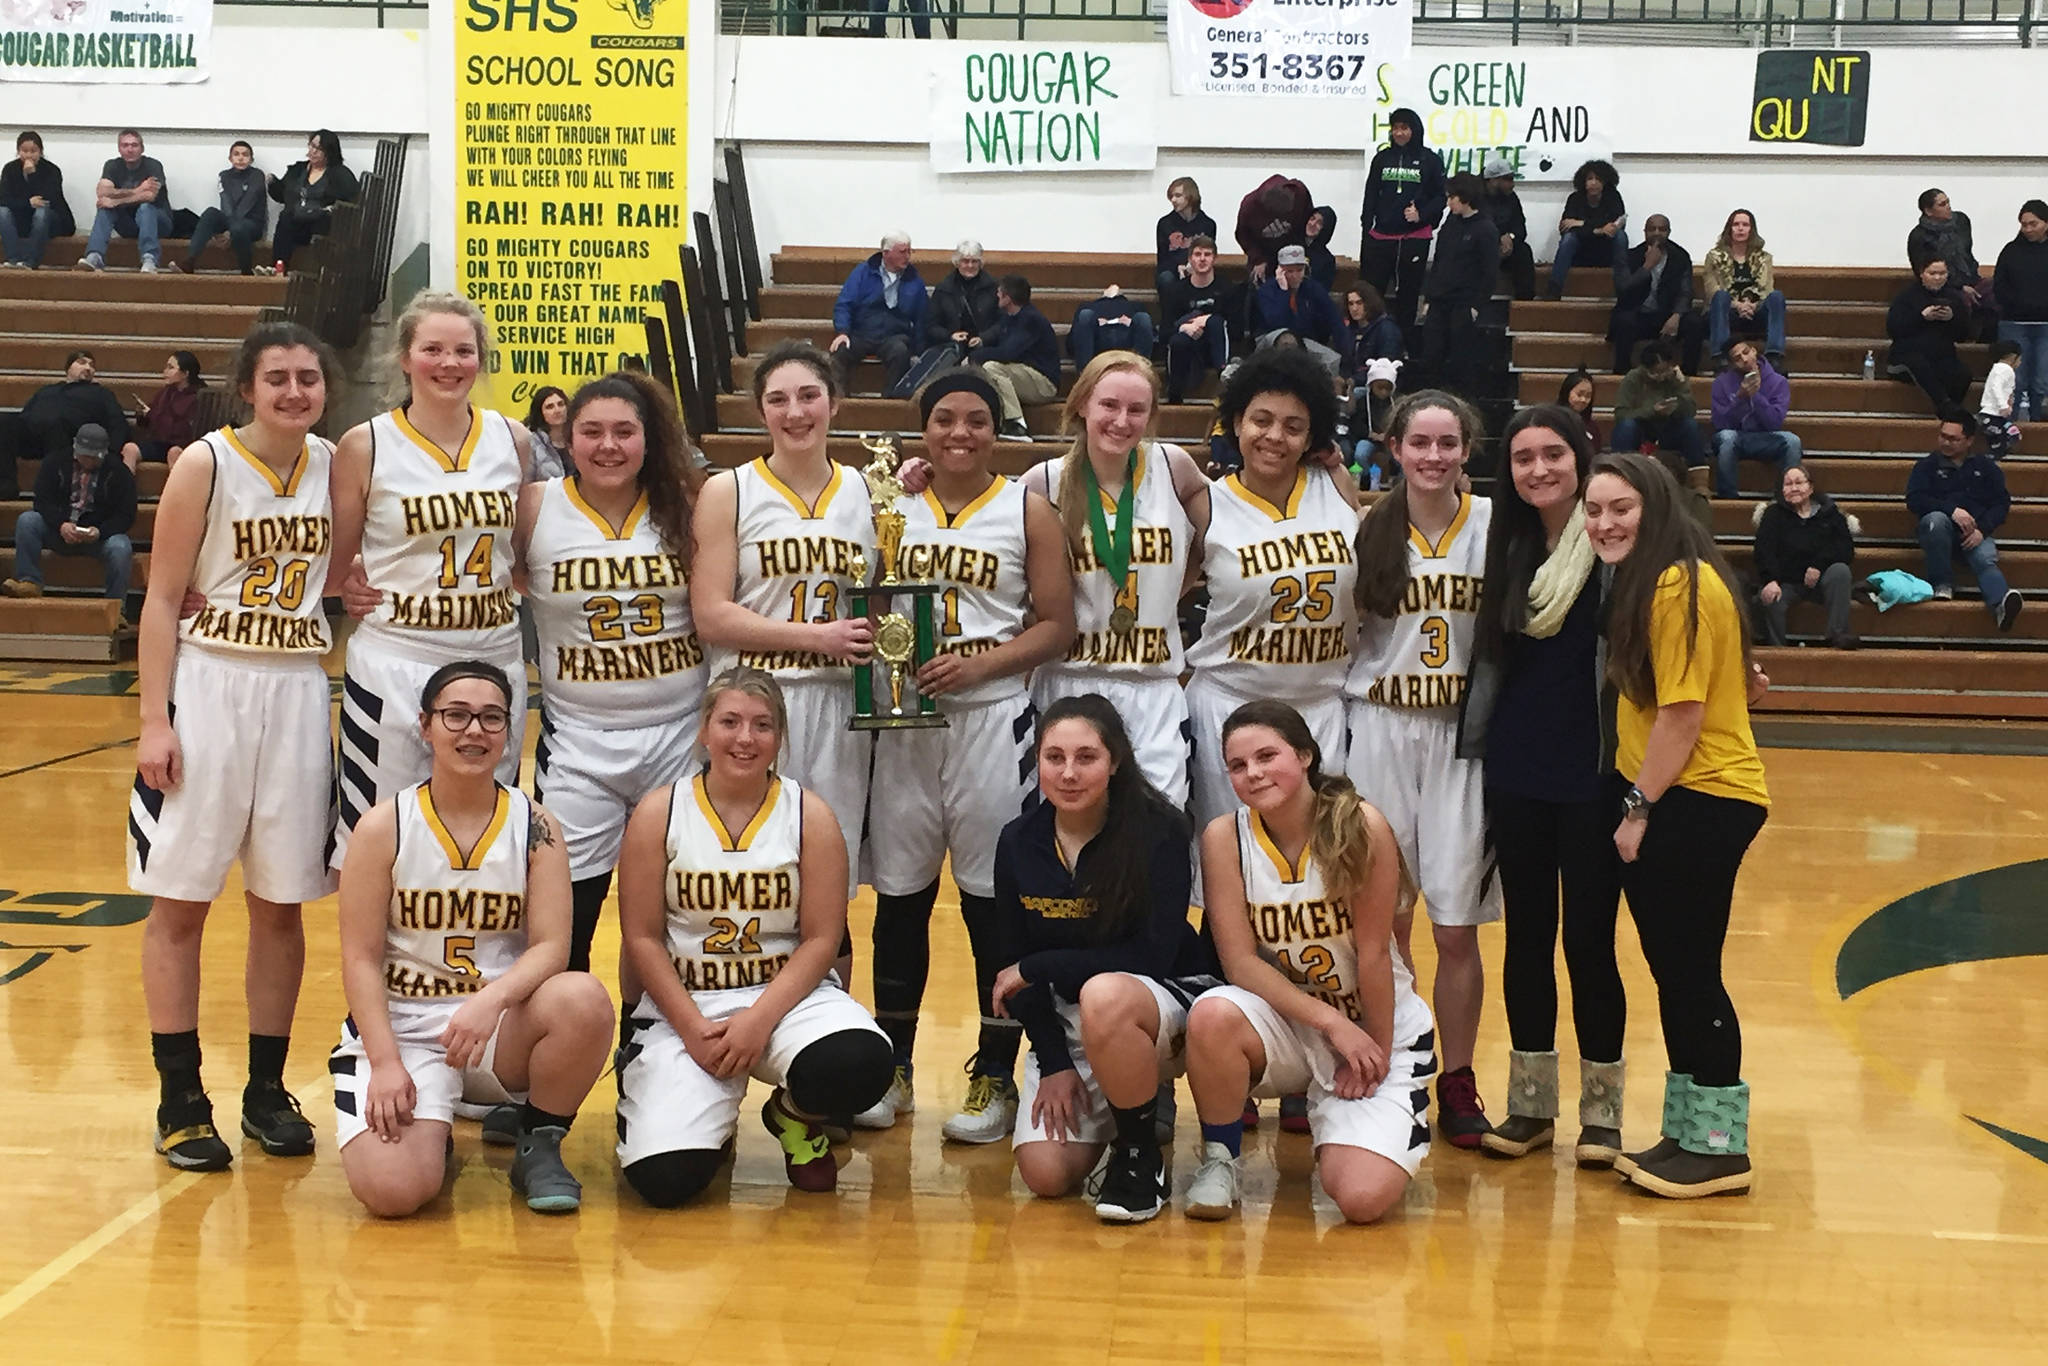 <span class="neFMT neFMT_PhotoCredit">Photo by Wendy Todd</span>                                The Homer girls basketball team holds their first place trophy at the Service Cougar Tip Off tournament, held Friday and Saturday, Dec. 14-15, 2018 in Anchorage, Alaska. Top row from left to right: Marina Carroll, Cora Parish, Bri Hetrick, Rylyn Todd, Alia bales, Kelli Bishop, Lexi Dawson, Laura Inama, Manager Brooke Knotte, and Manager Katie Clark. Bottom row: Shelly Johnson, Alexis Kreger, Hannah Hatfield, and Rylee Doughty.